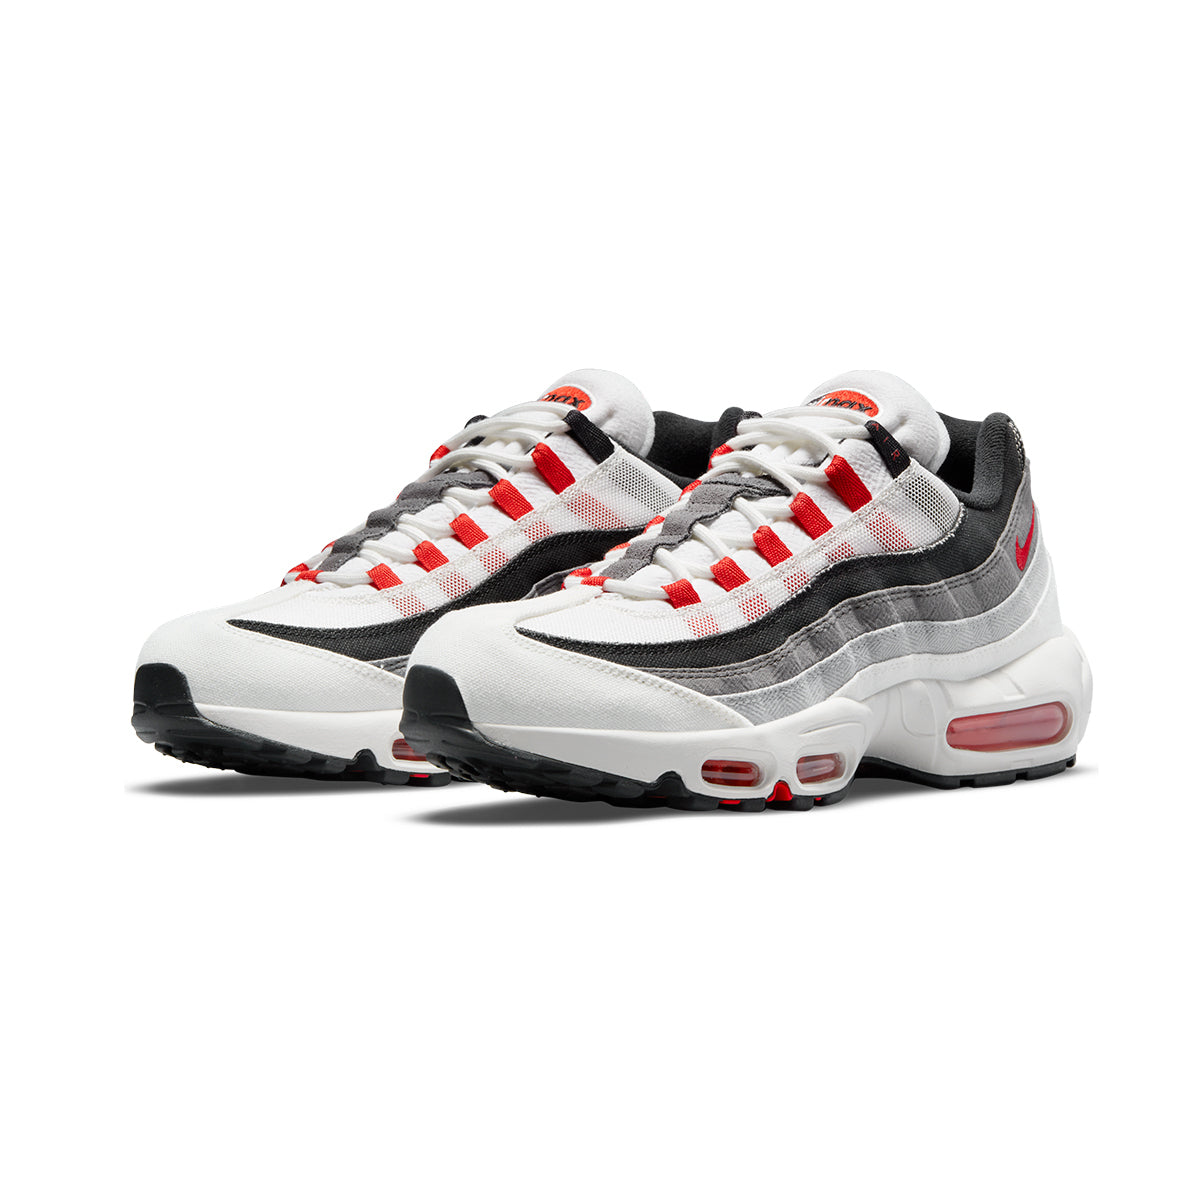 Nike Air Max 3 sneakers in white, red and black